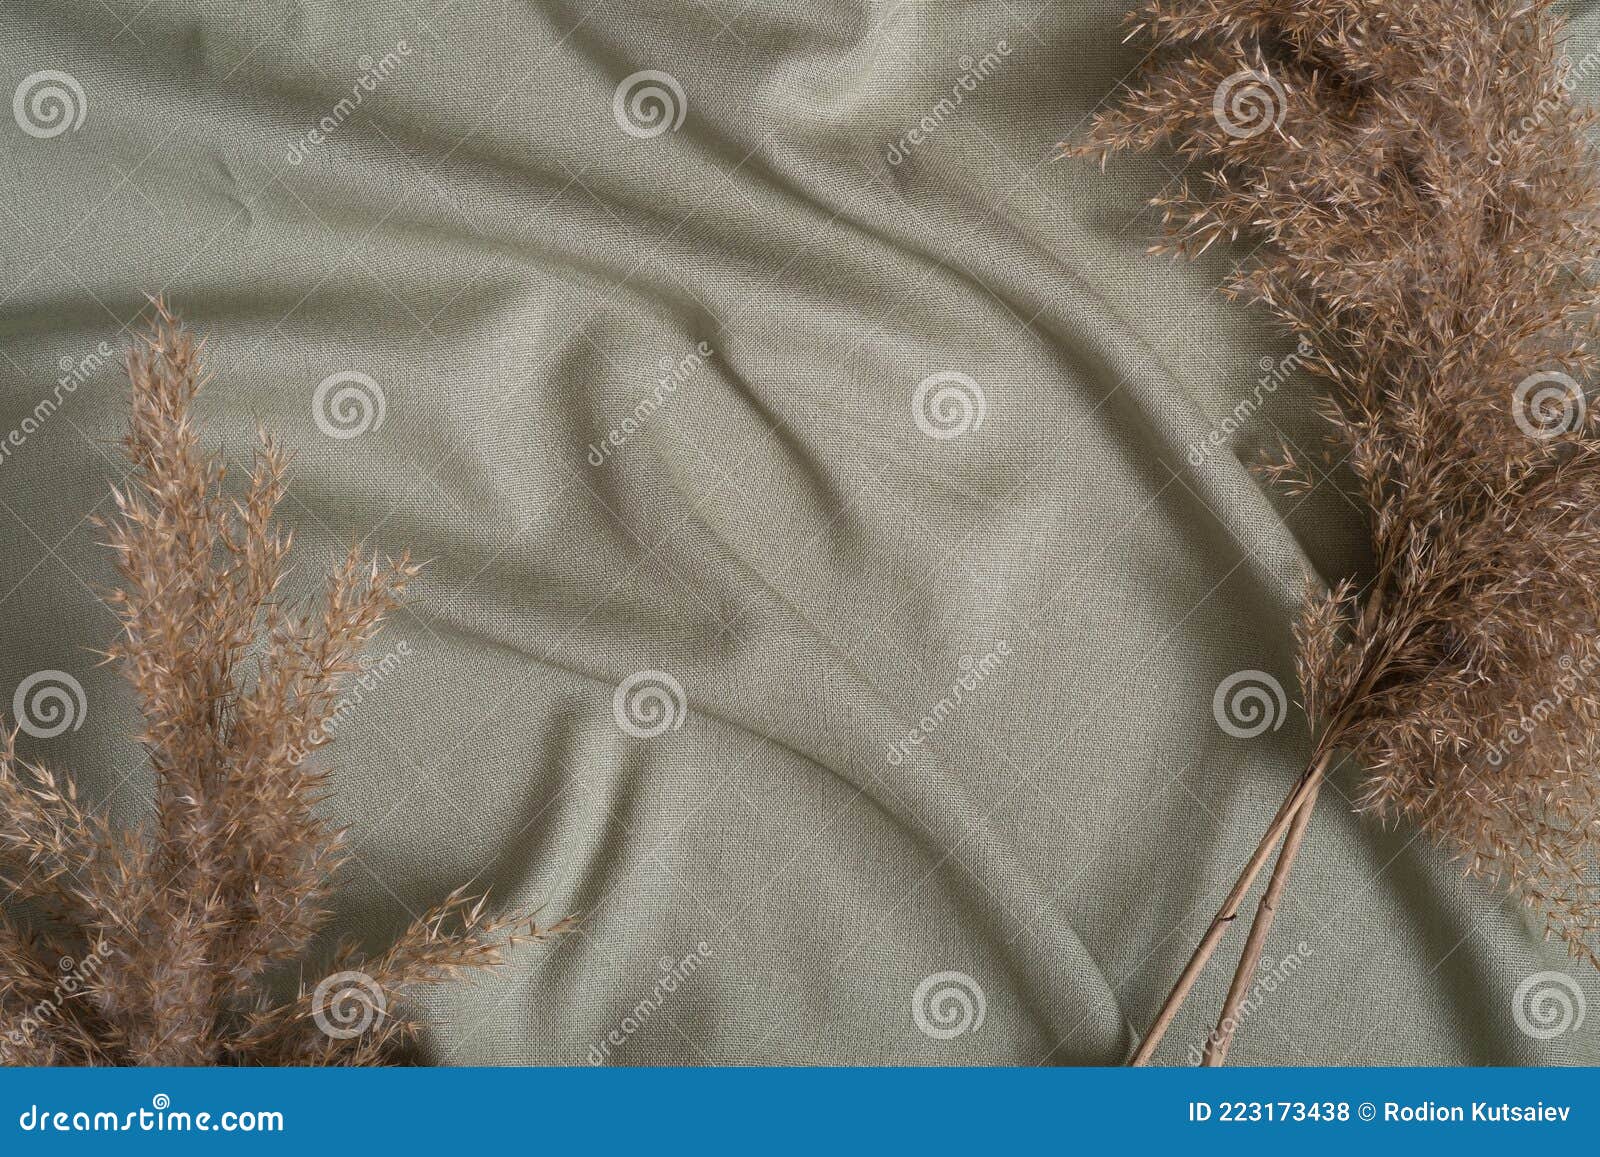 Green Neutral Colored Textile, Linen Fabric Near To Decor Dry Pampas Grass  Stock Photo - Image of minimal, pampas: 223173438